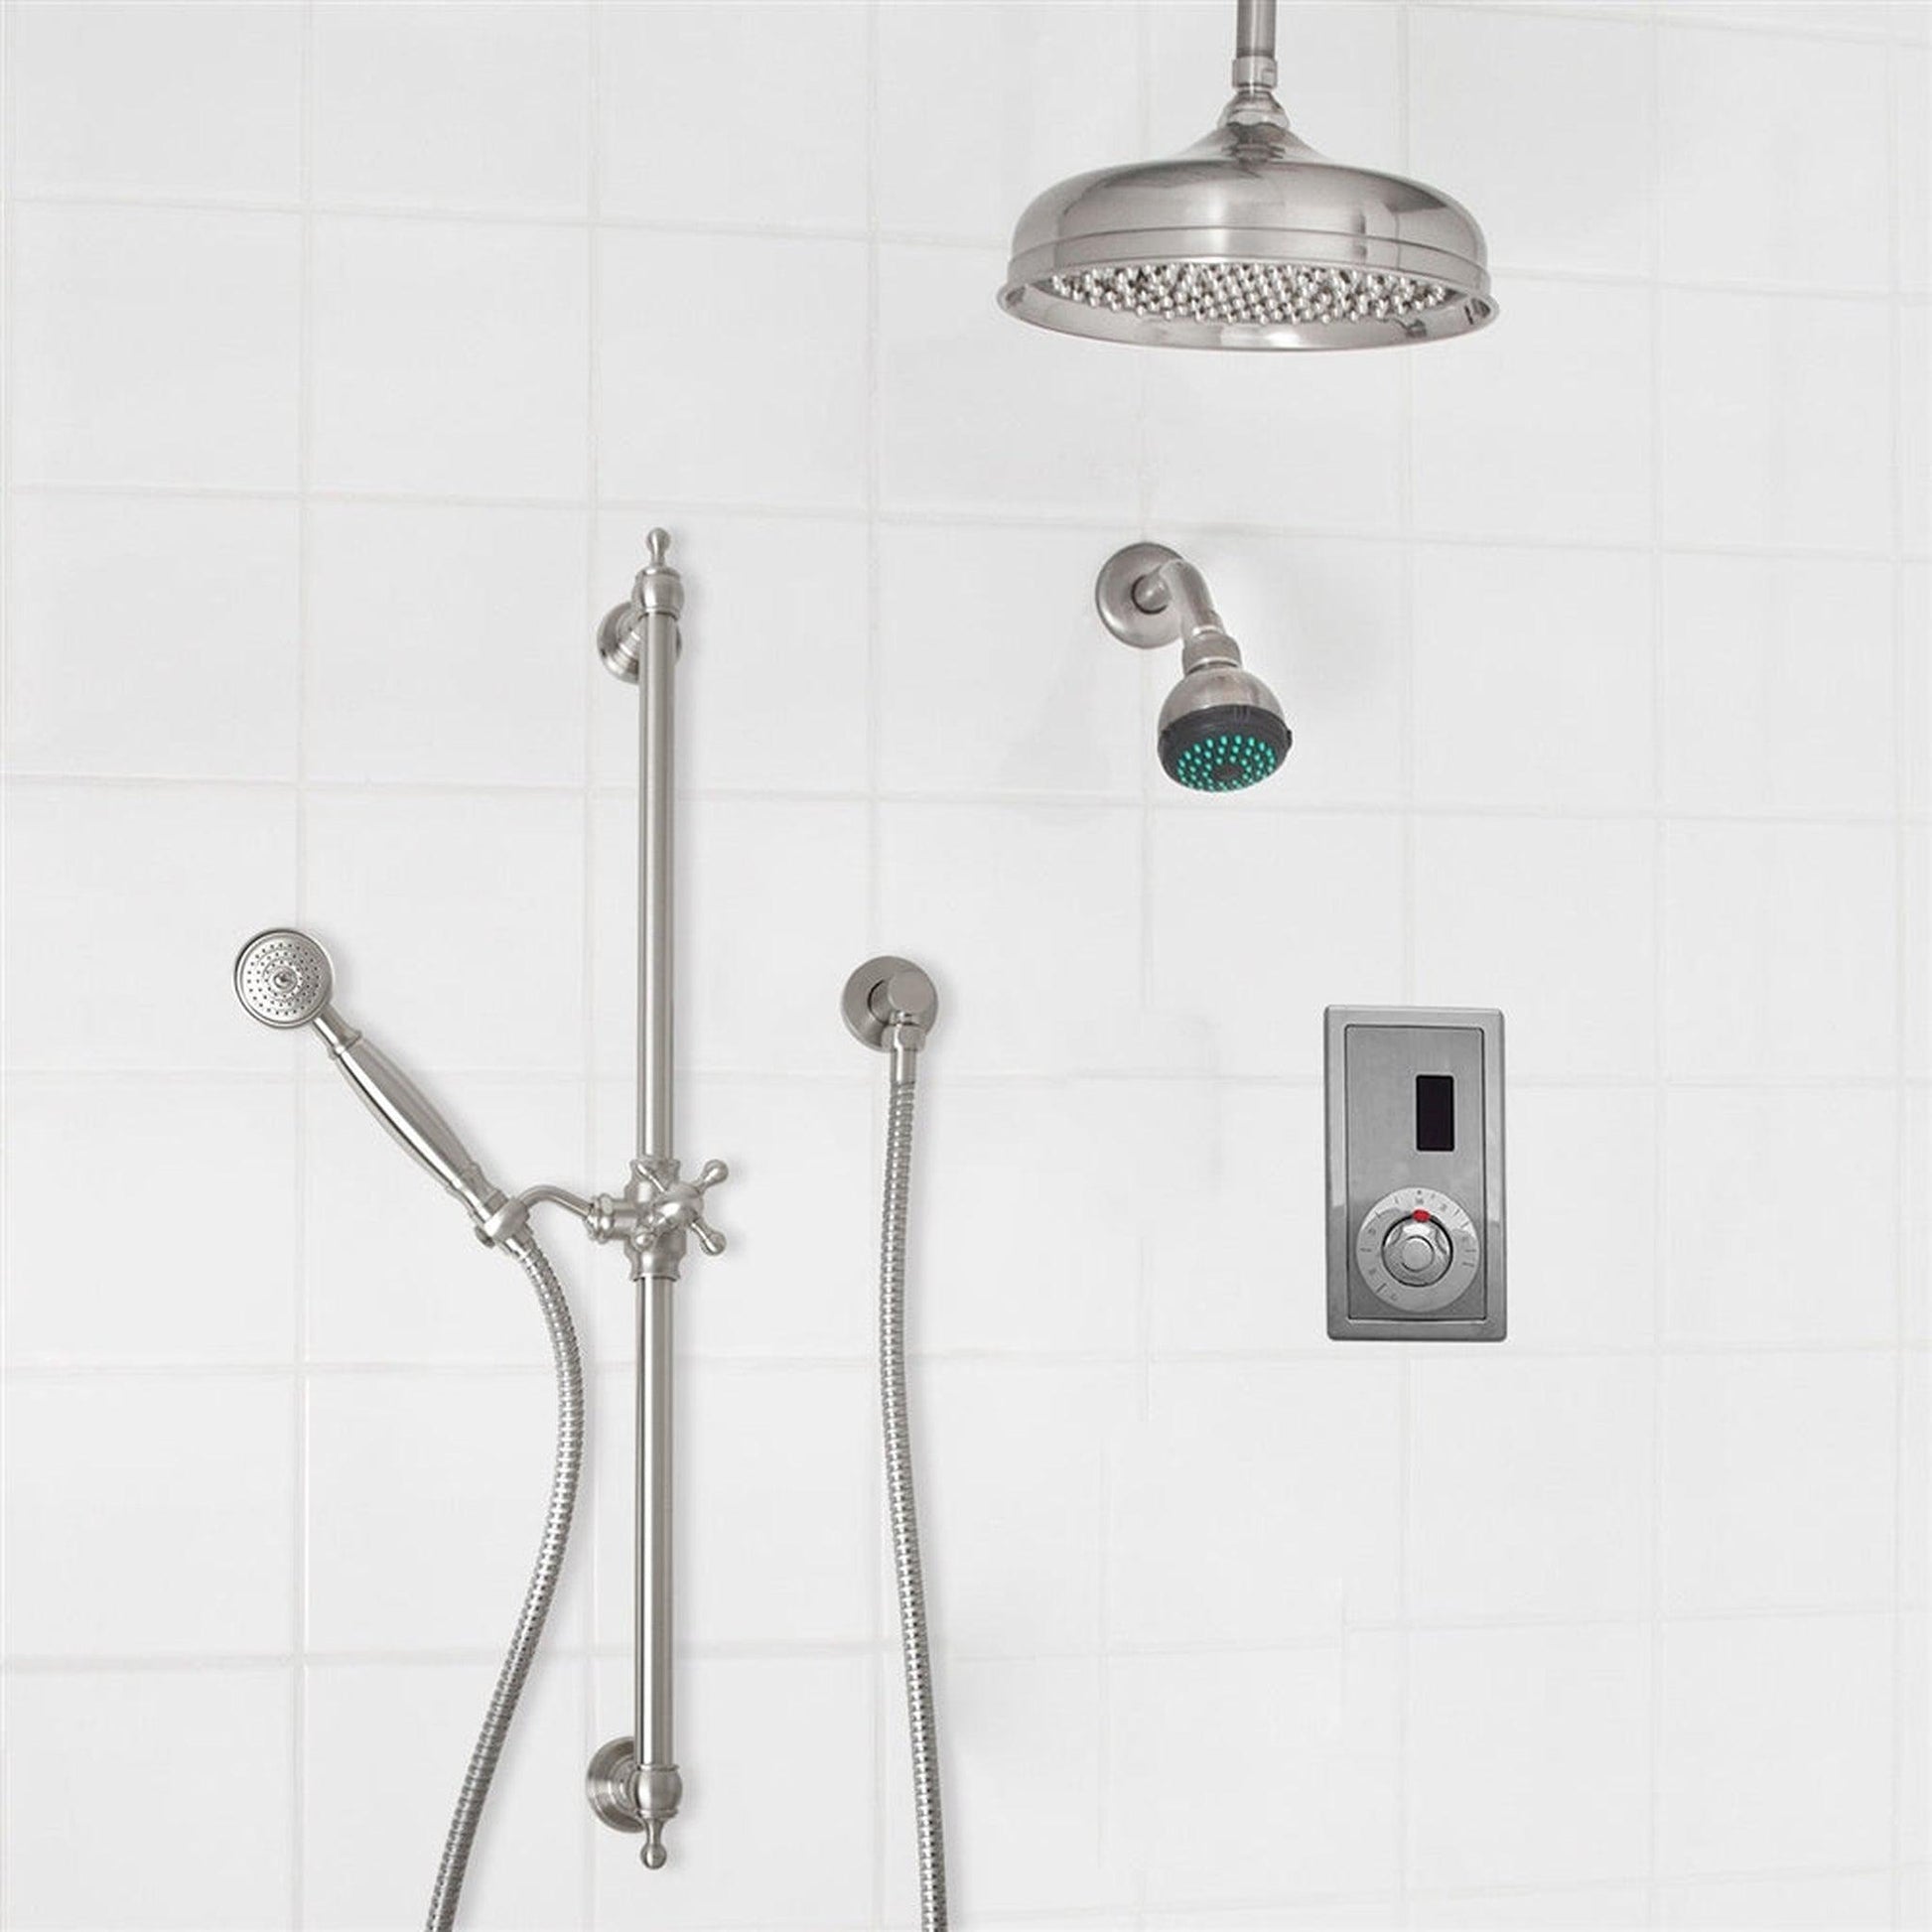 Fontana 10" Brushed Nickel Dual Shower Head Luxury Bathroom Automatic Thermostatic Sensor Temperature Dial Shower System With Hand Shower